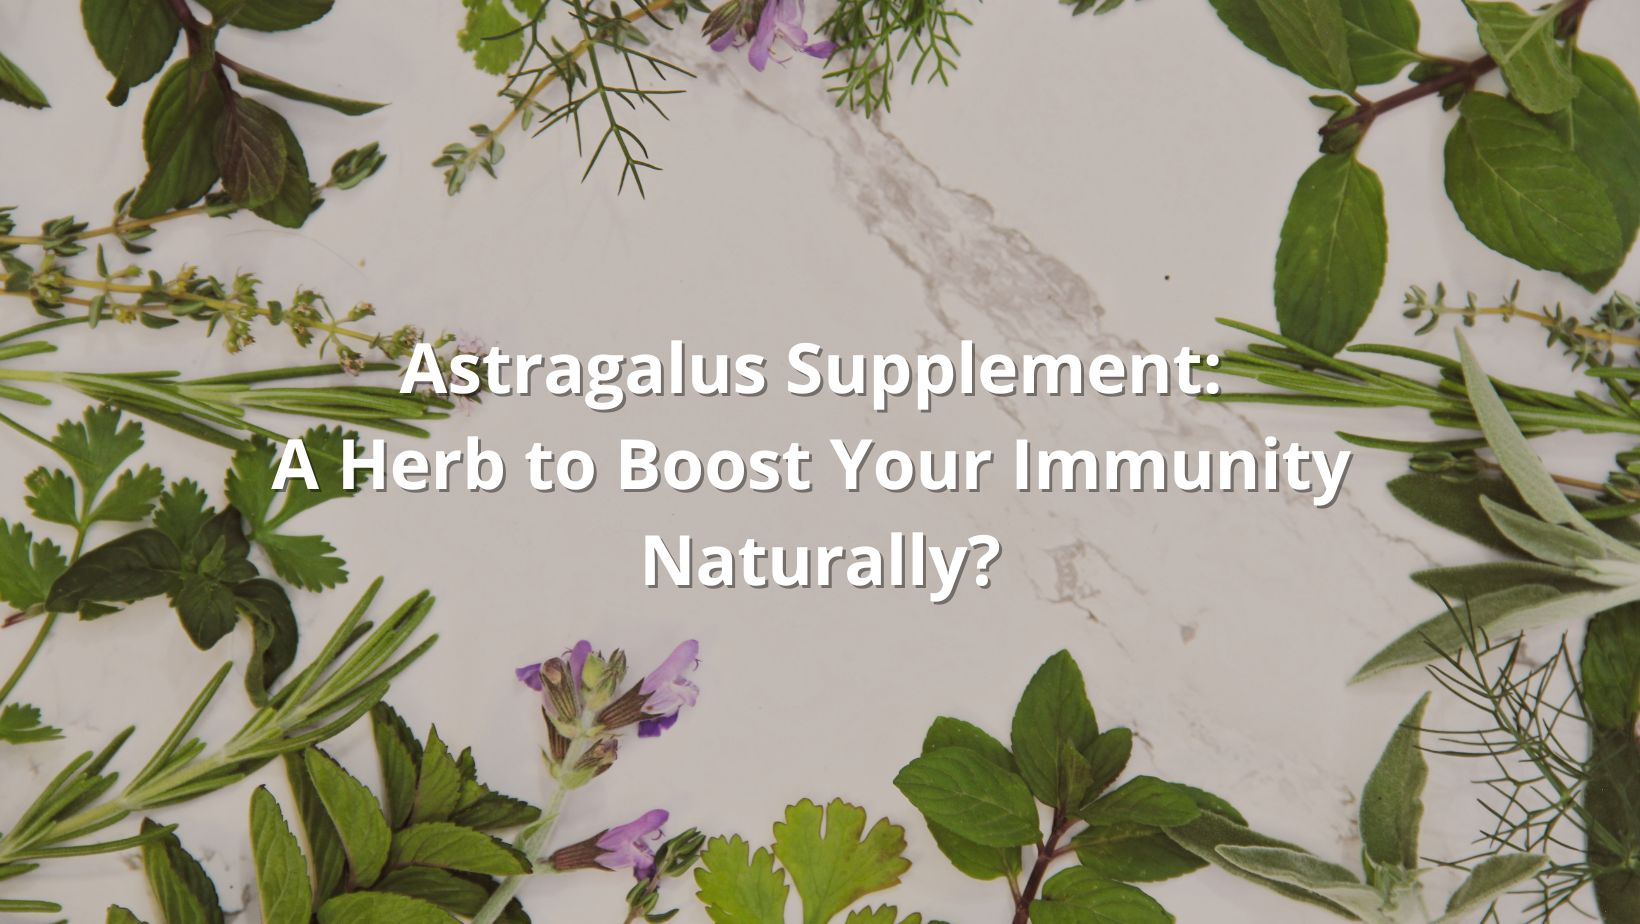 Astragalus supplement featured image